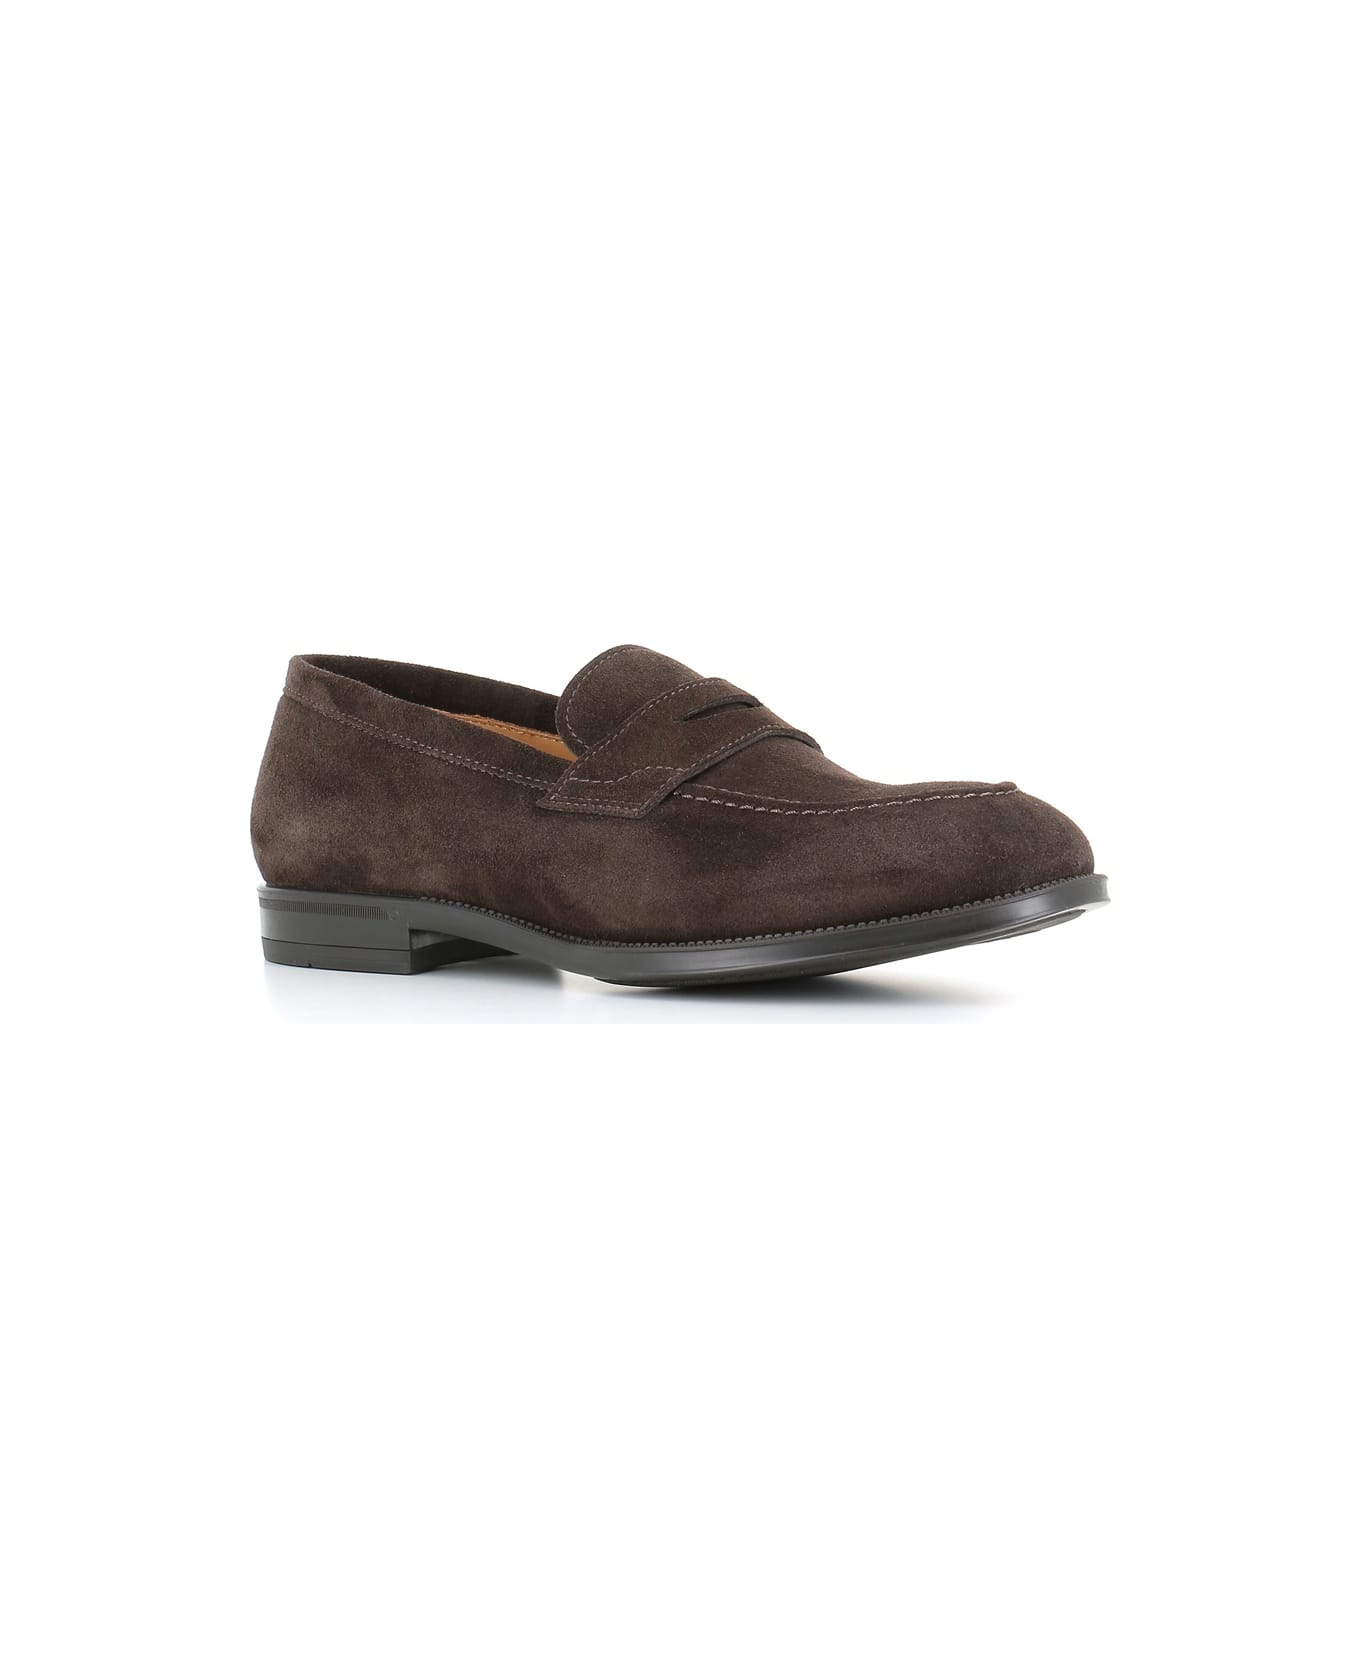 Henderson Baracco Loafer 83416.p.0 - Brown